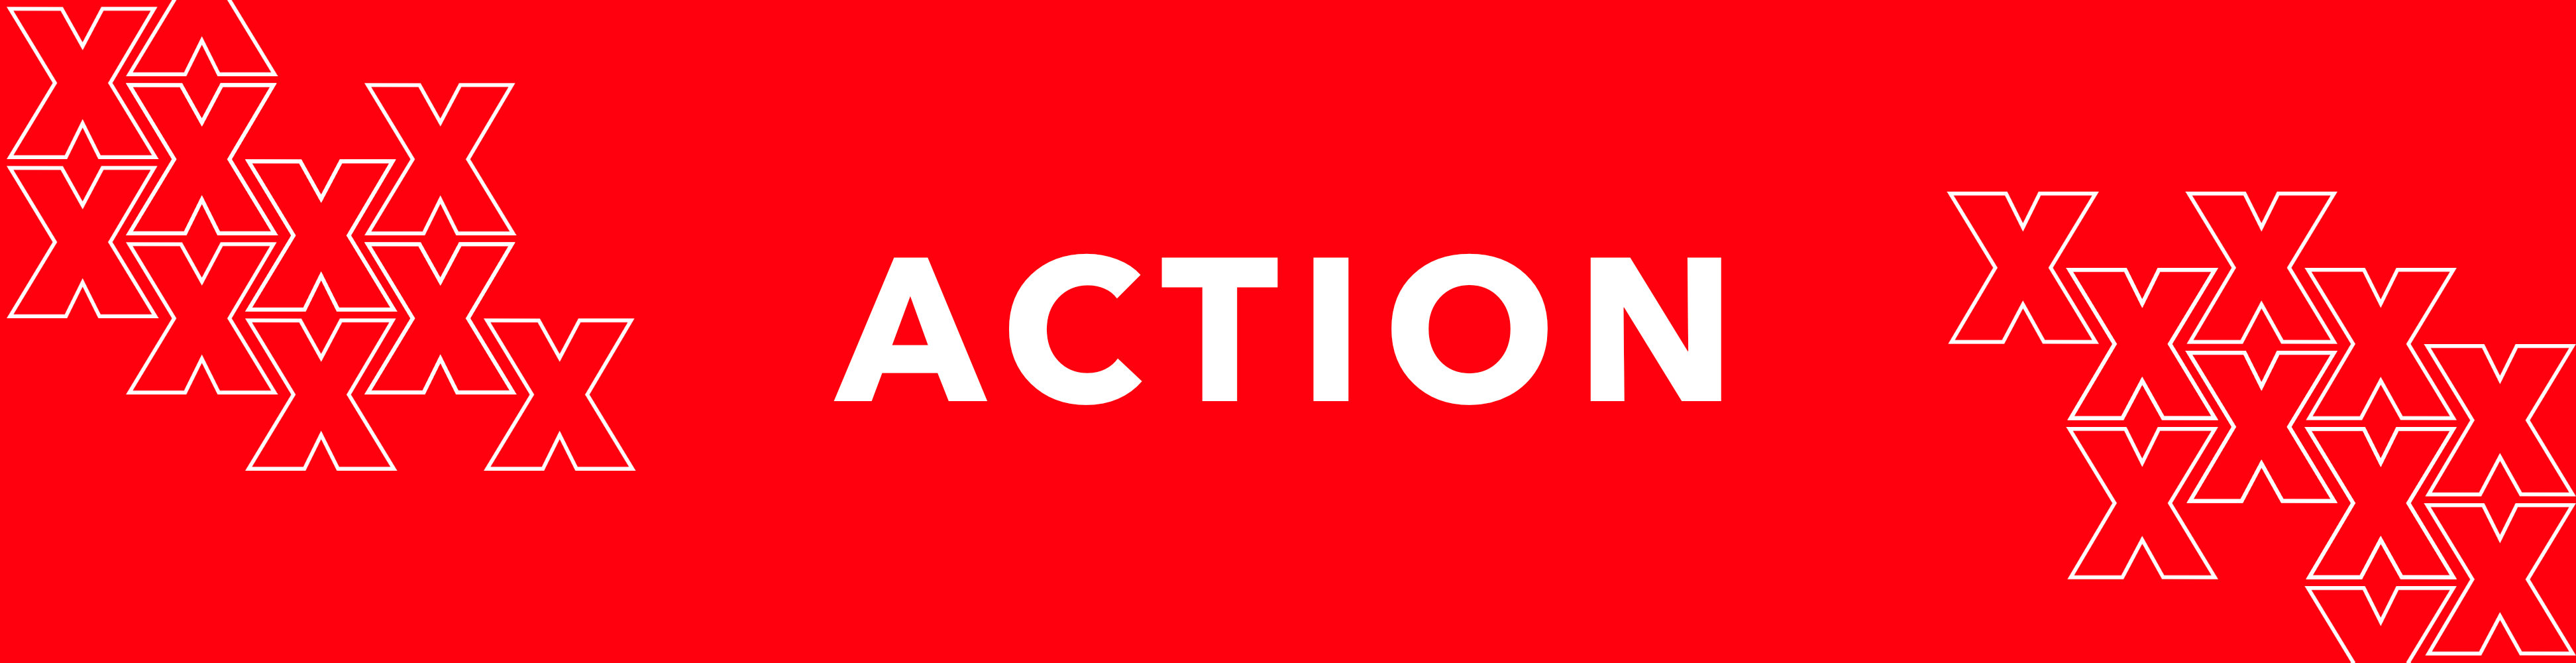 nos actions :: Downloads